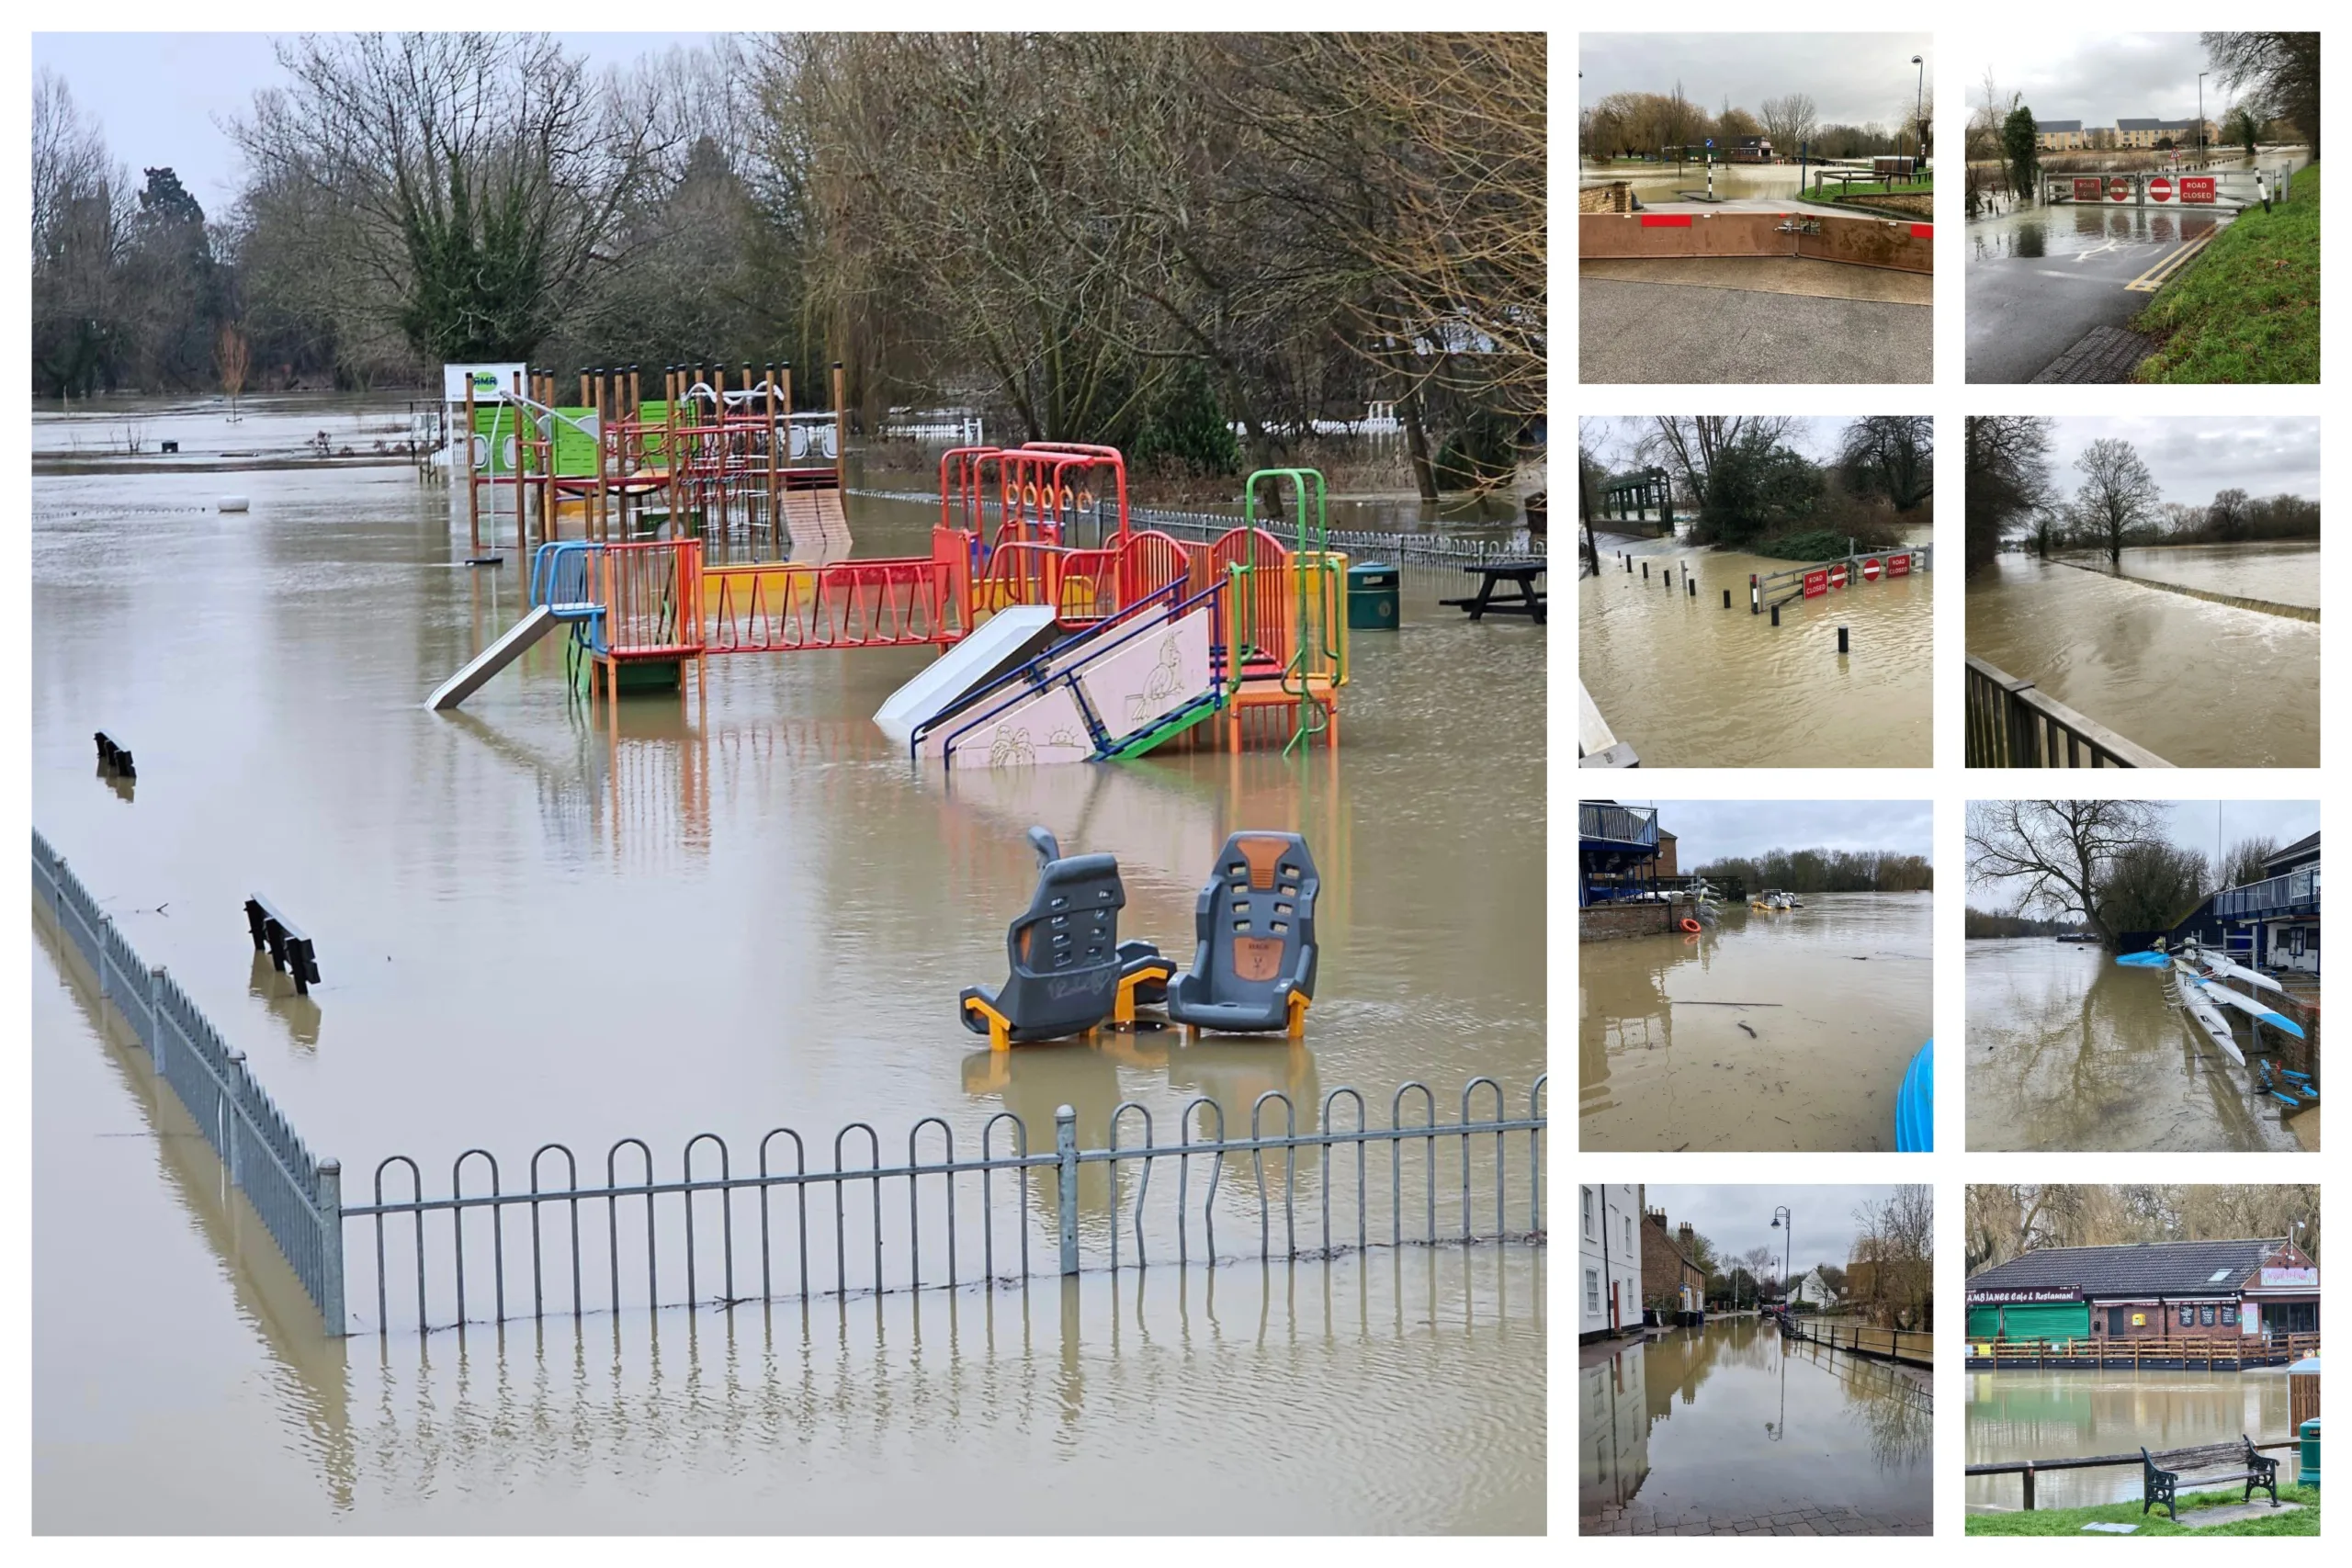 A spokesperson for Huntingdonshire District Council said: “Flood defences in St Neots have been deployed as a flood warning is in place for River Great Ouse at Eaton Socon, Eynesbury, Eaton Ford, and St Neots.